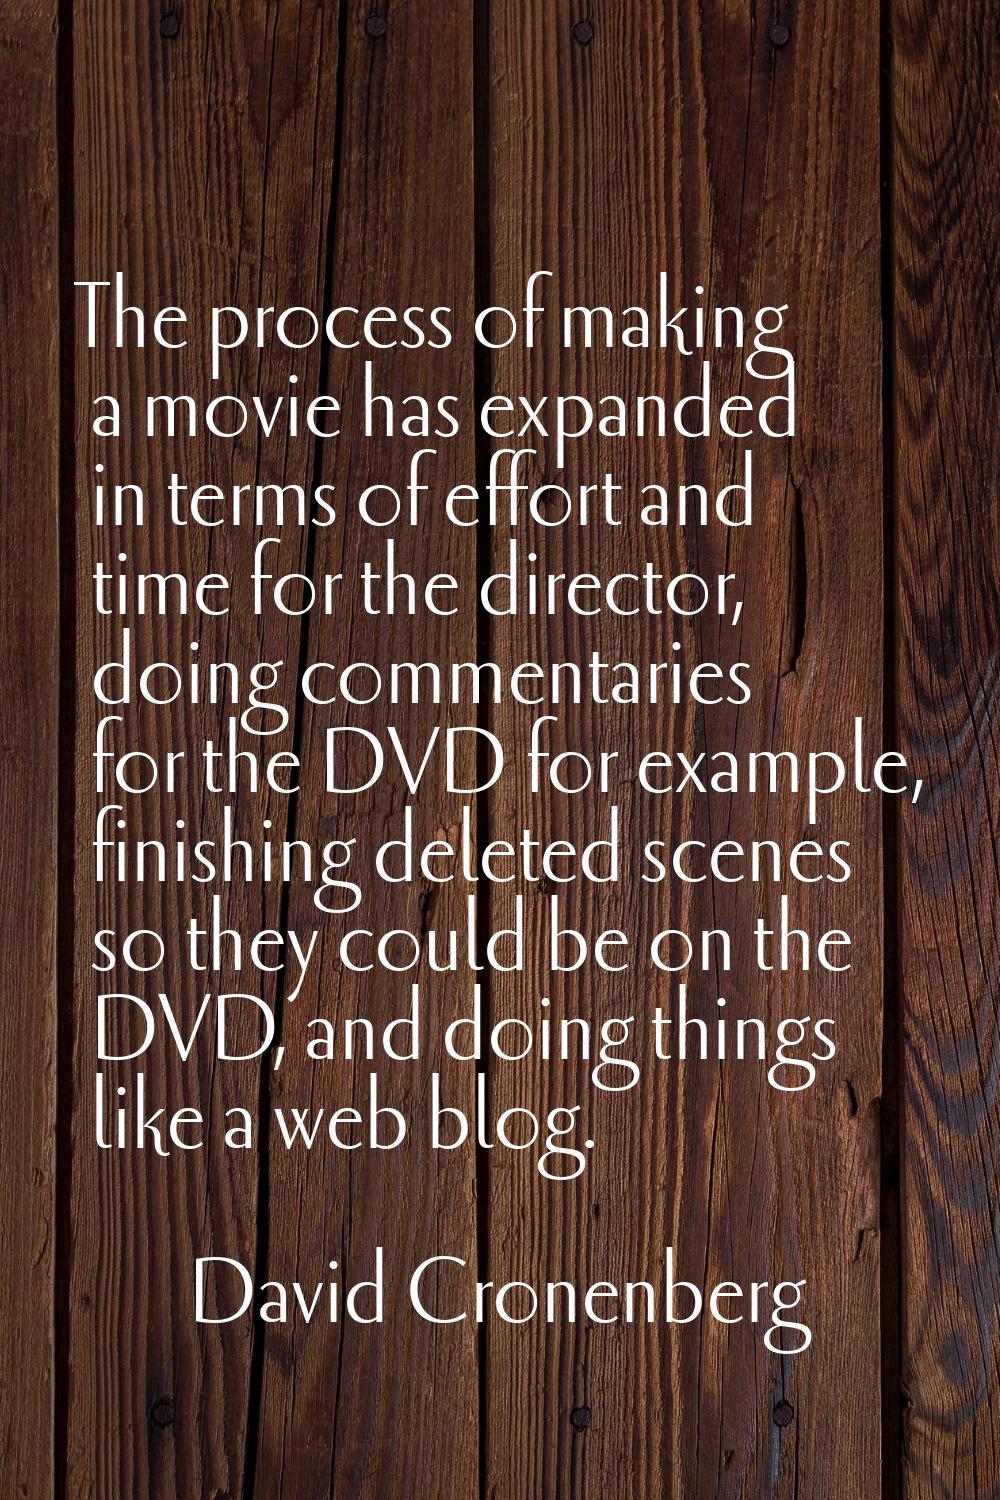 The process of making a movie has expanded in terms of effort and time for the director, doing comm